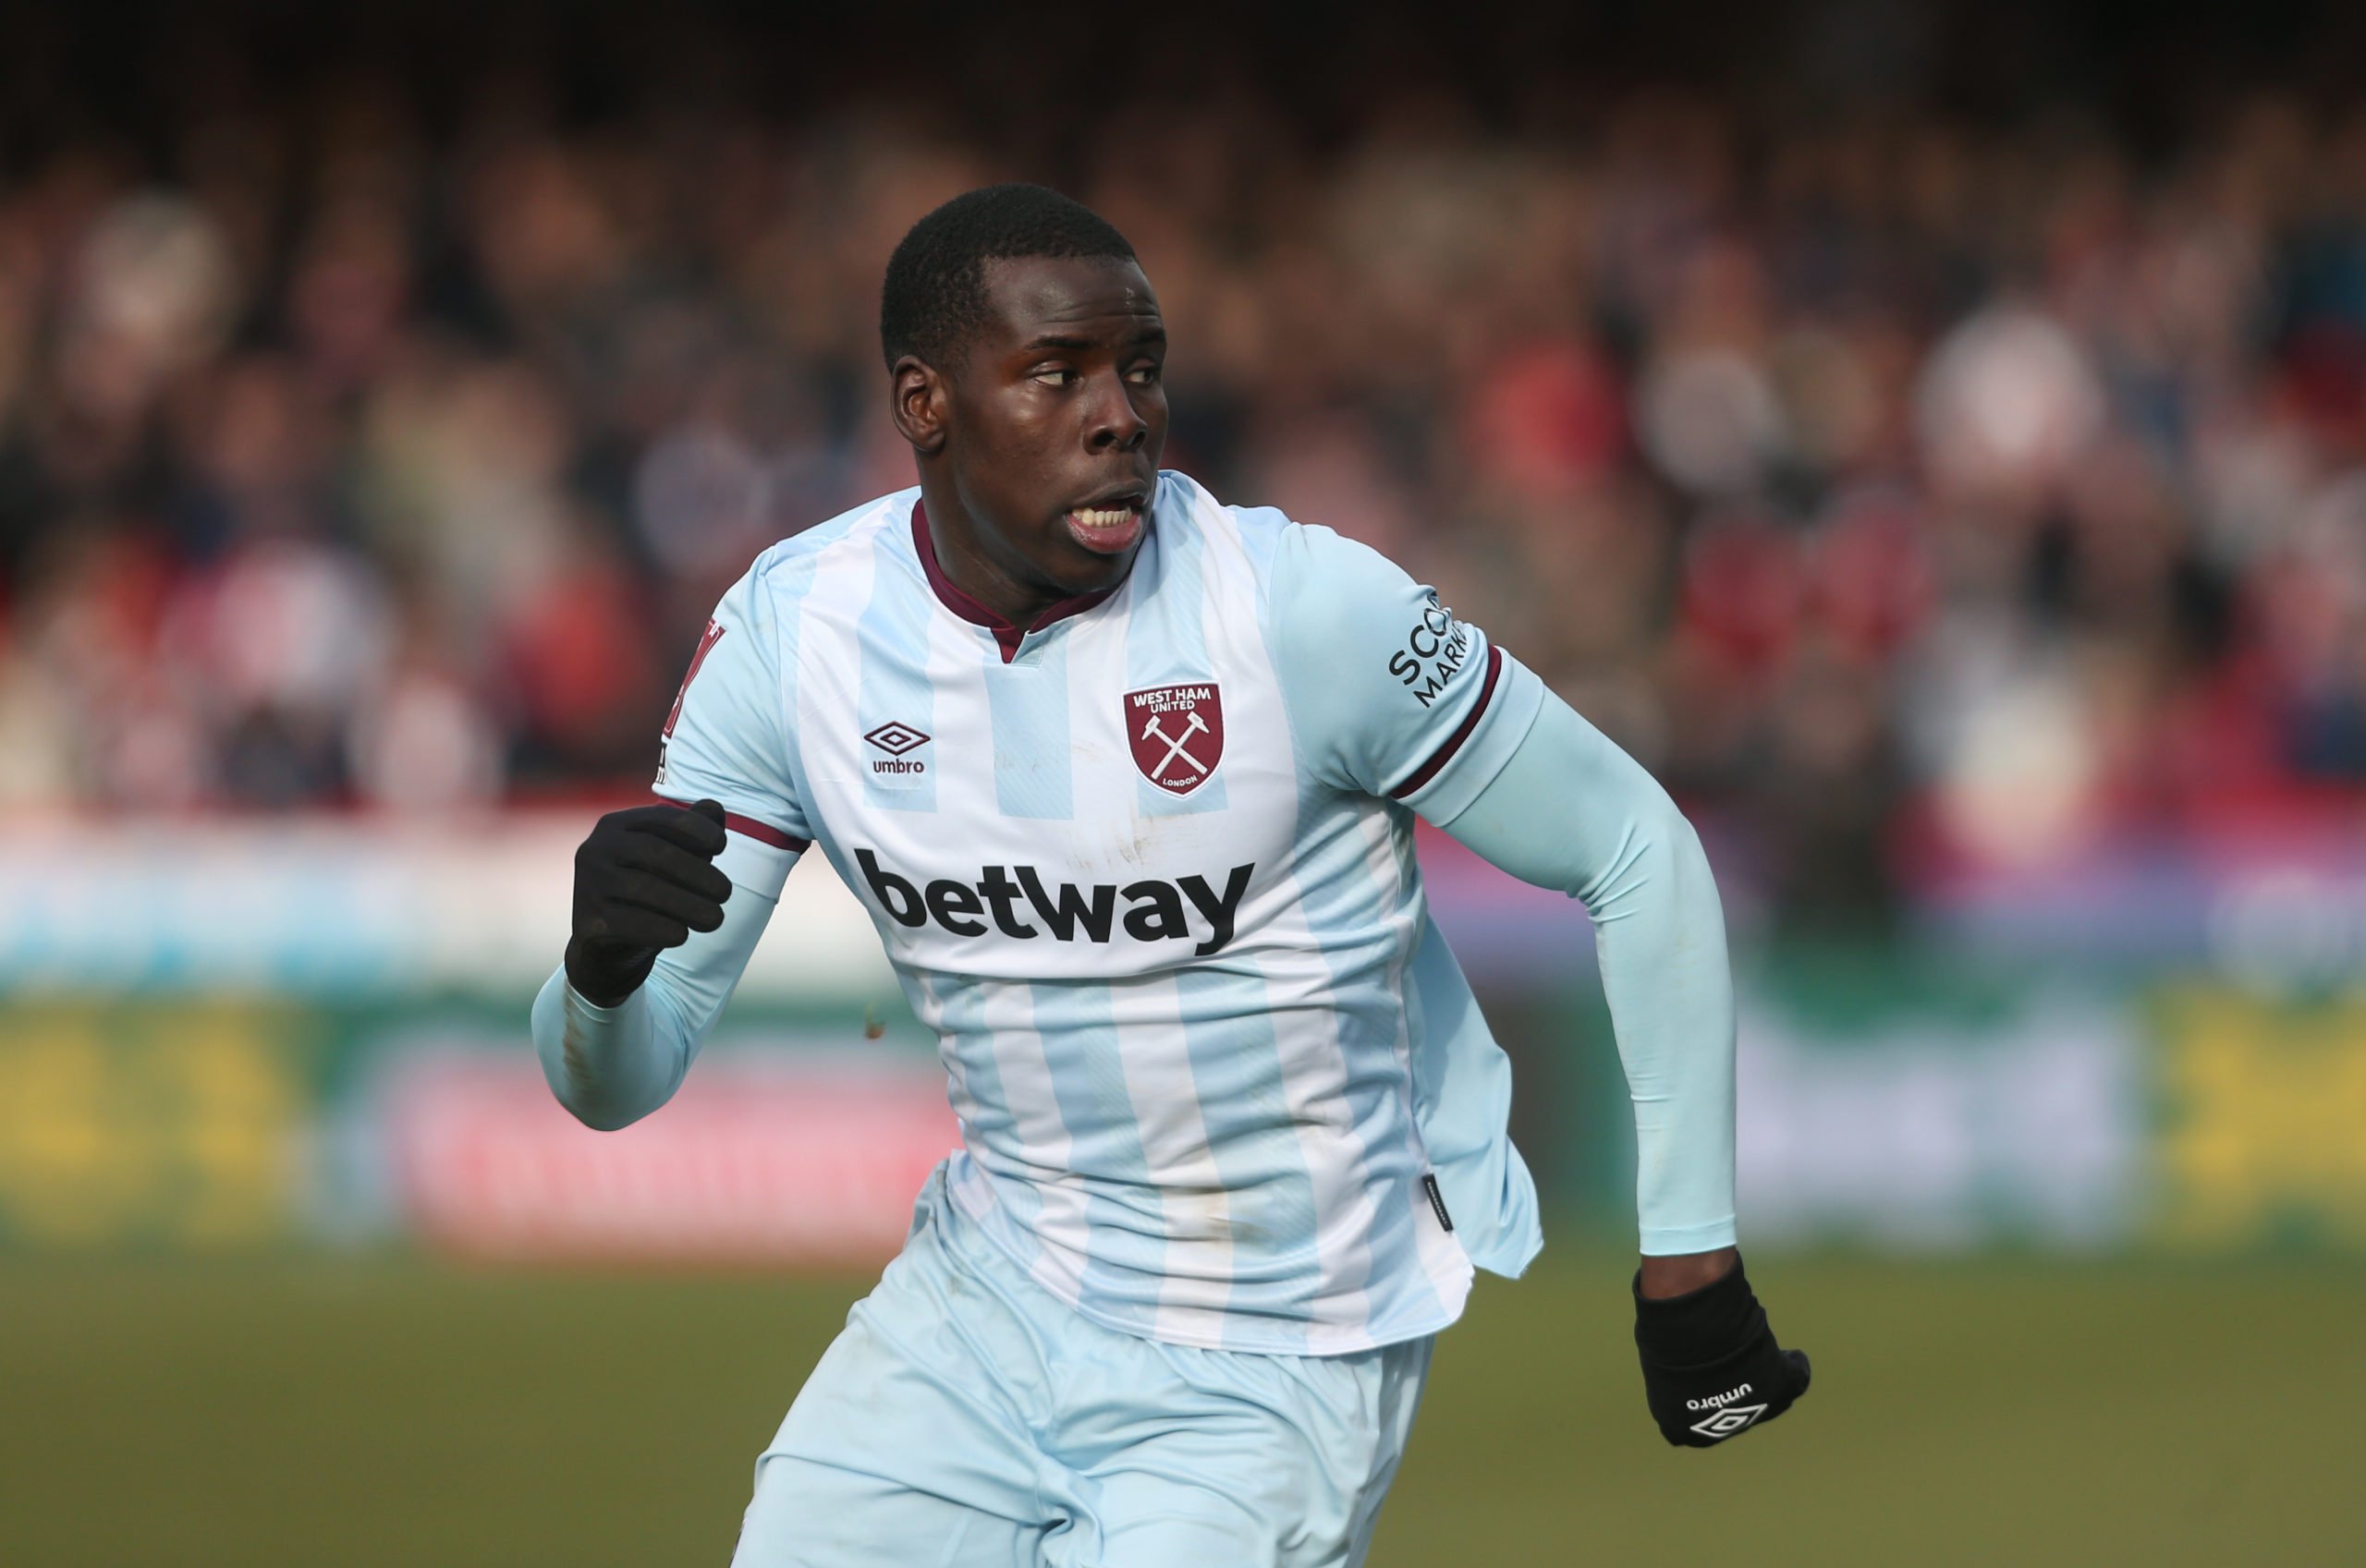 Kurt Zouma spotted in picture from West Ham training ahead of Watford clash